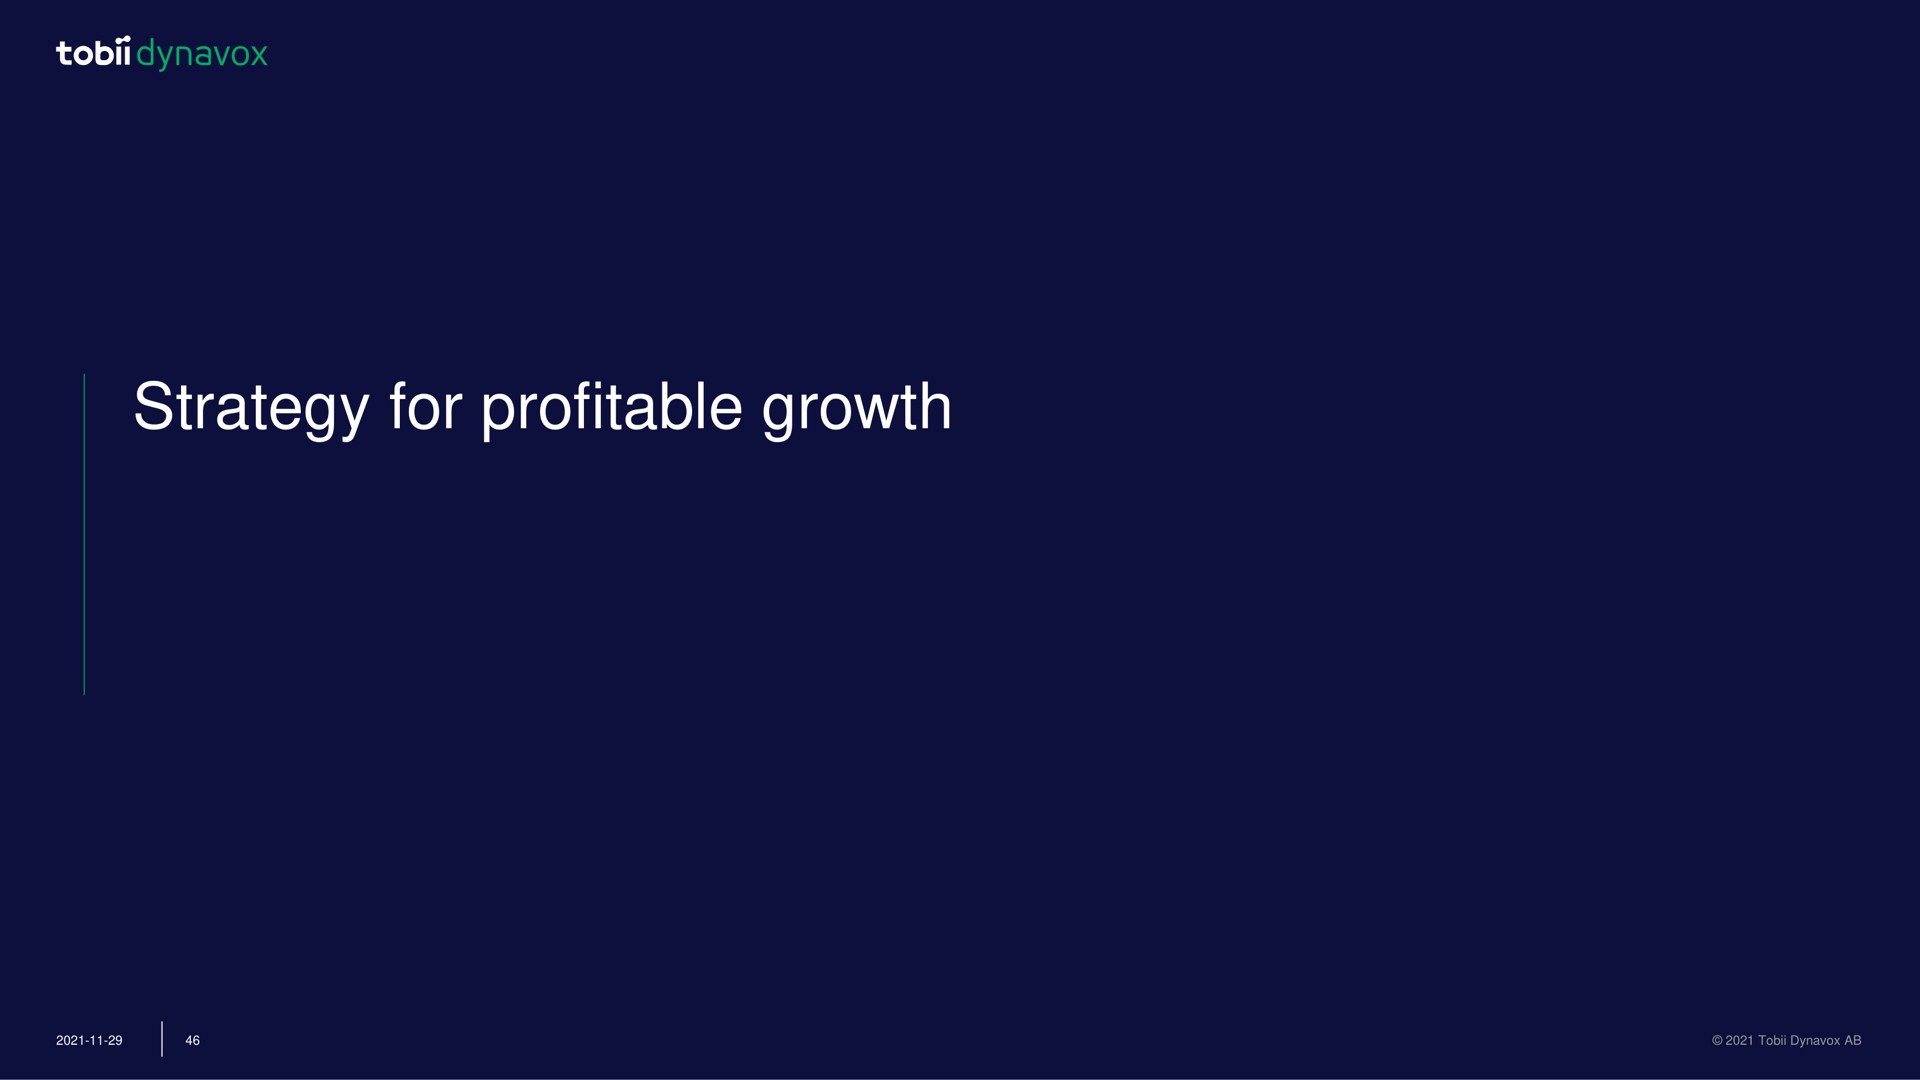 strategy for profitable growth | Tobii Dynavox